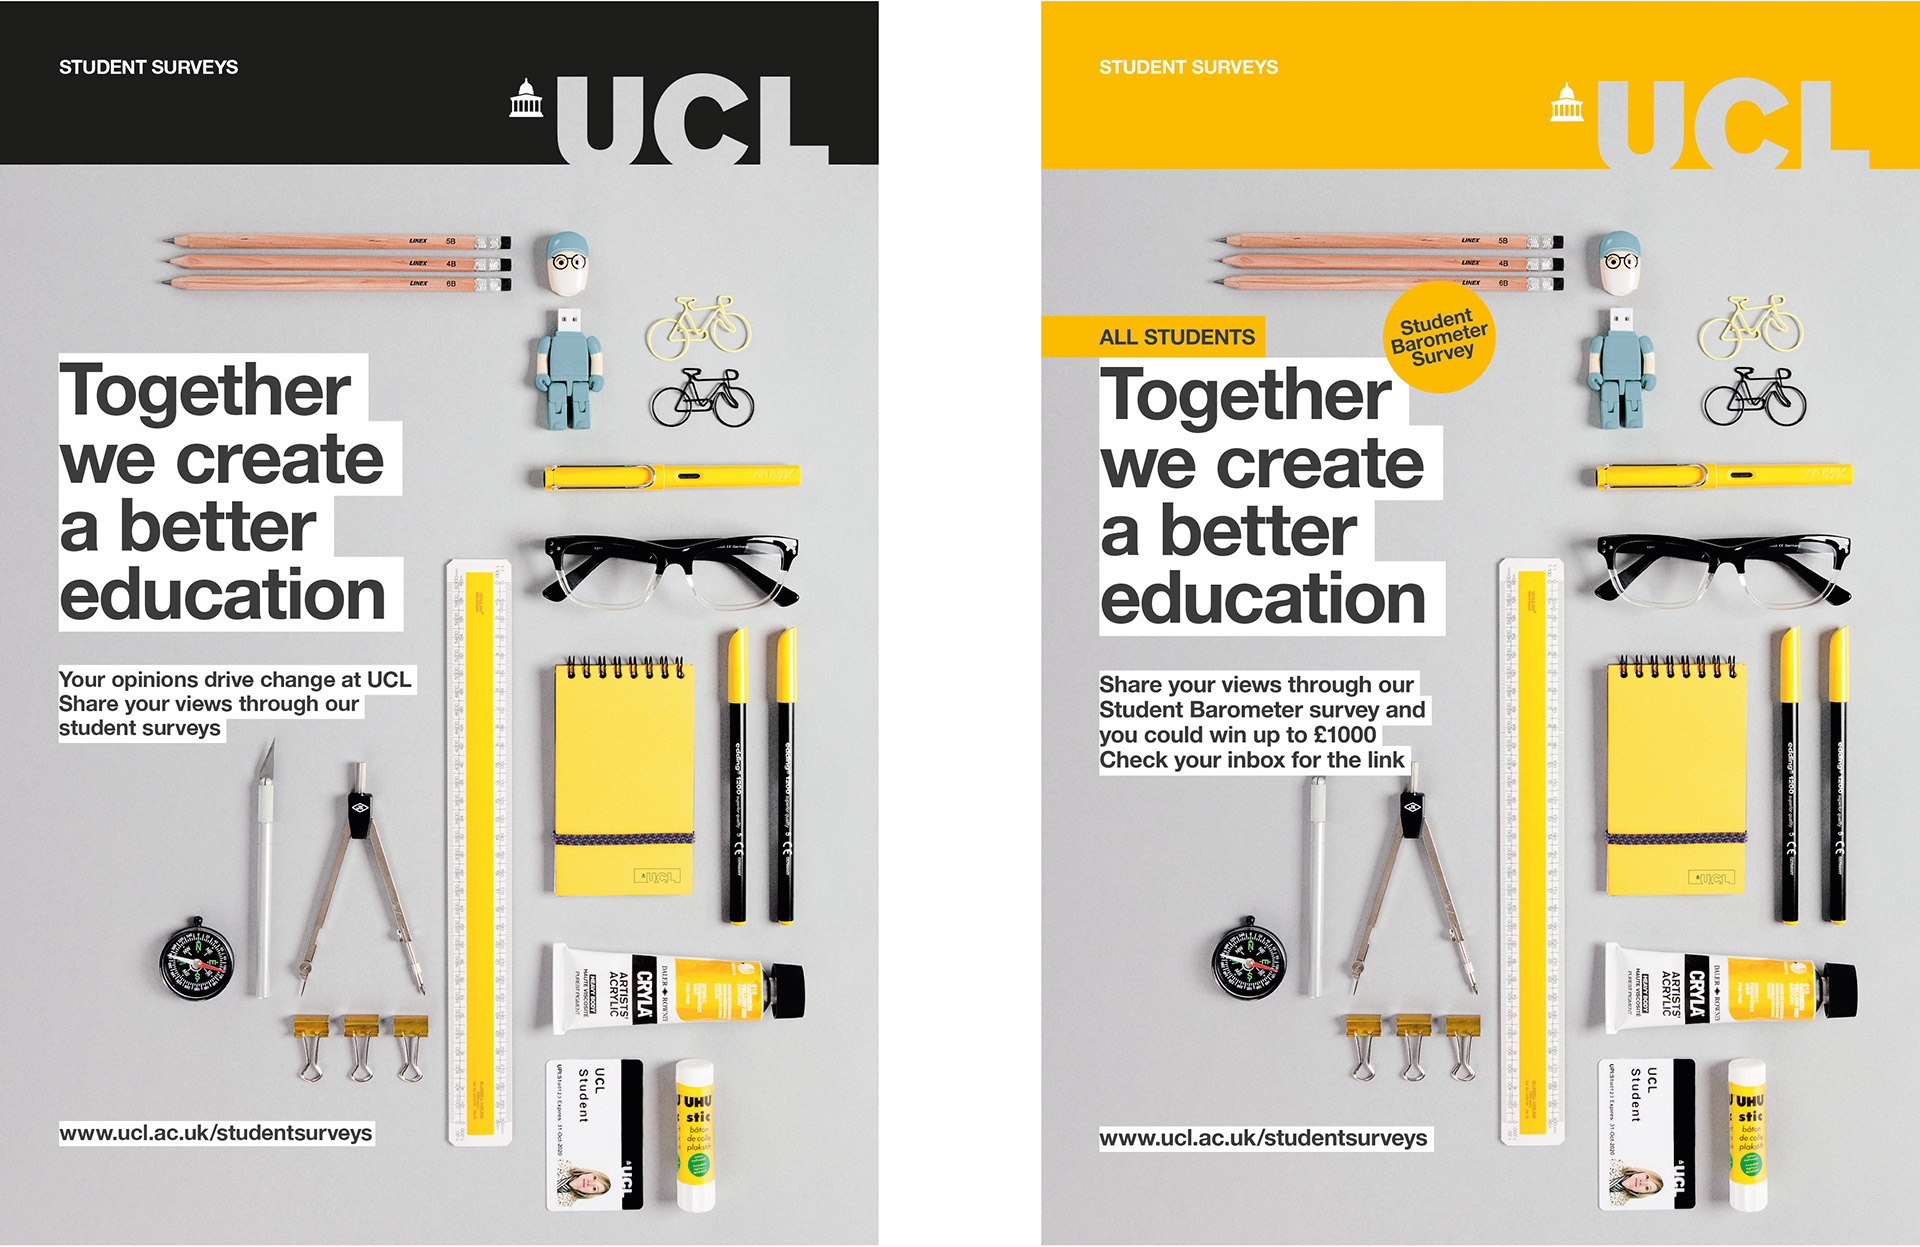 Student survey campaign for University College London designed by Irish Butcher